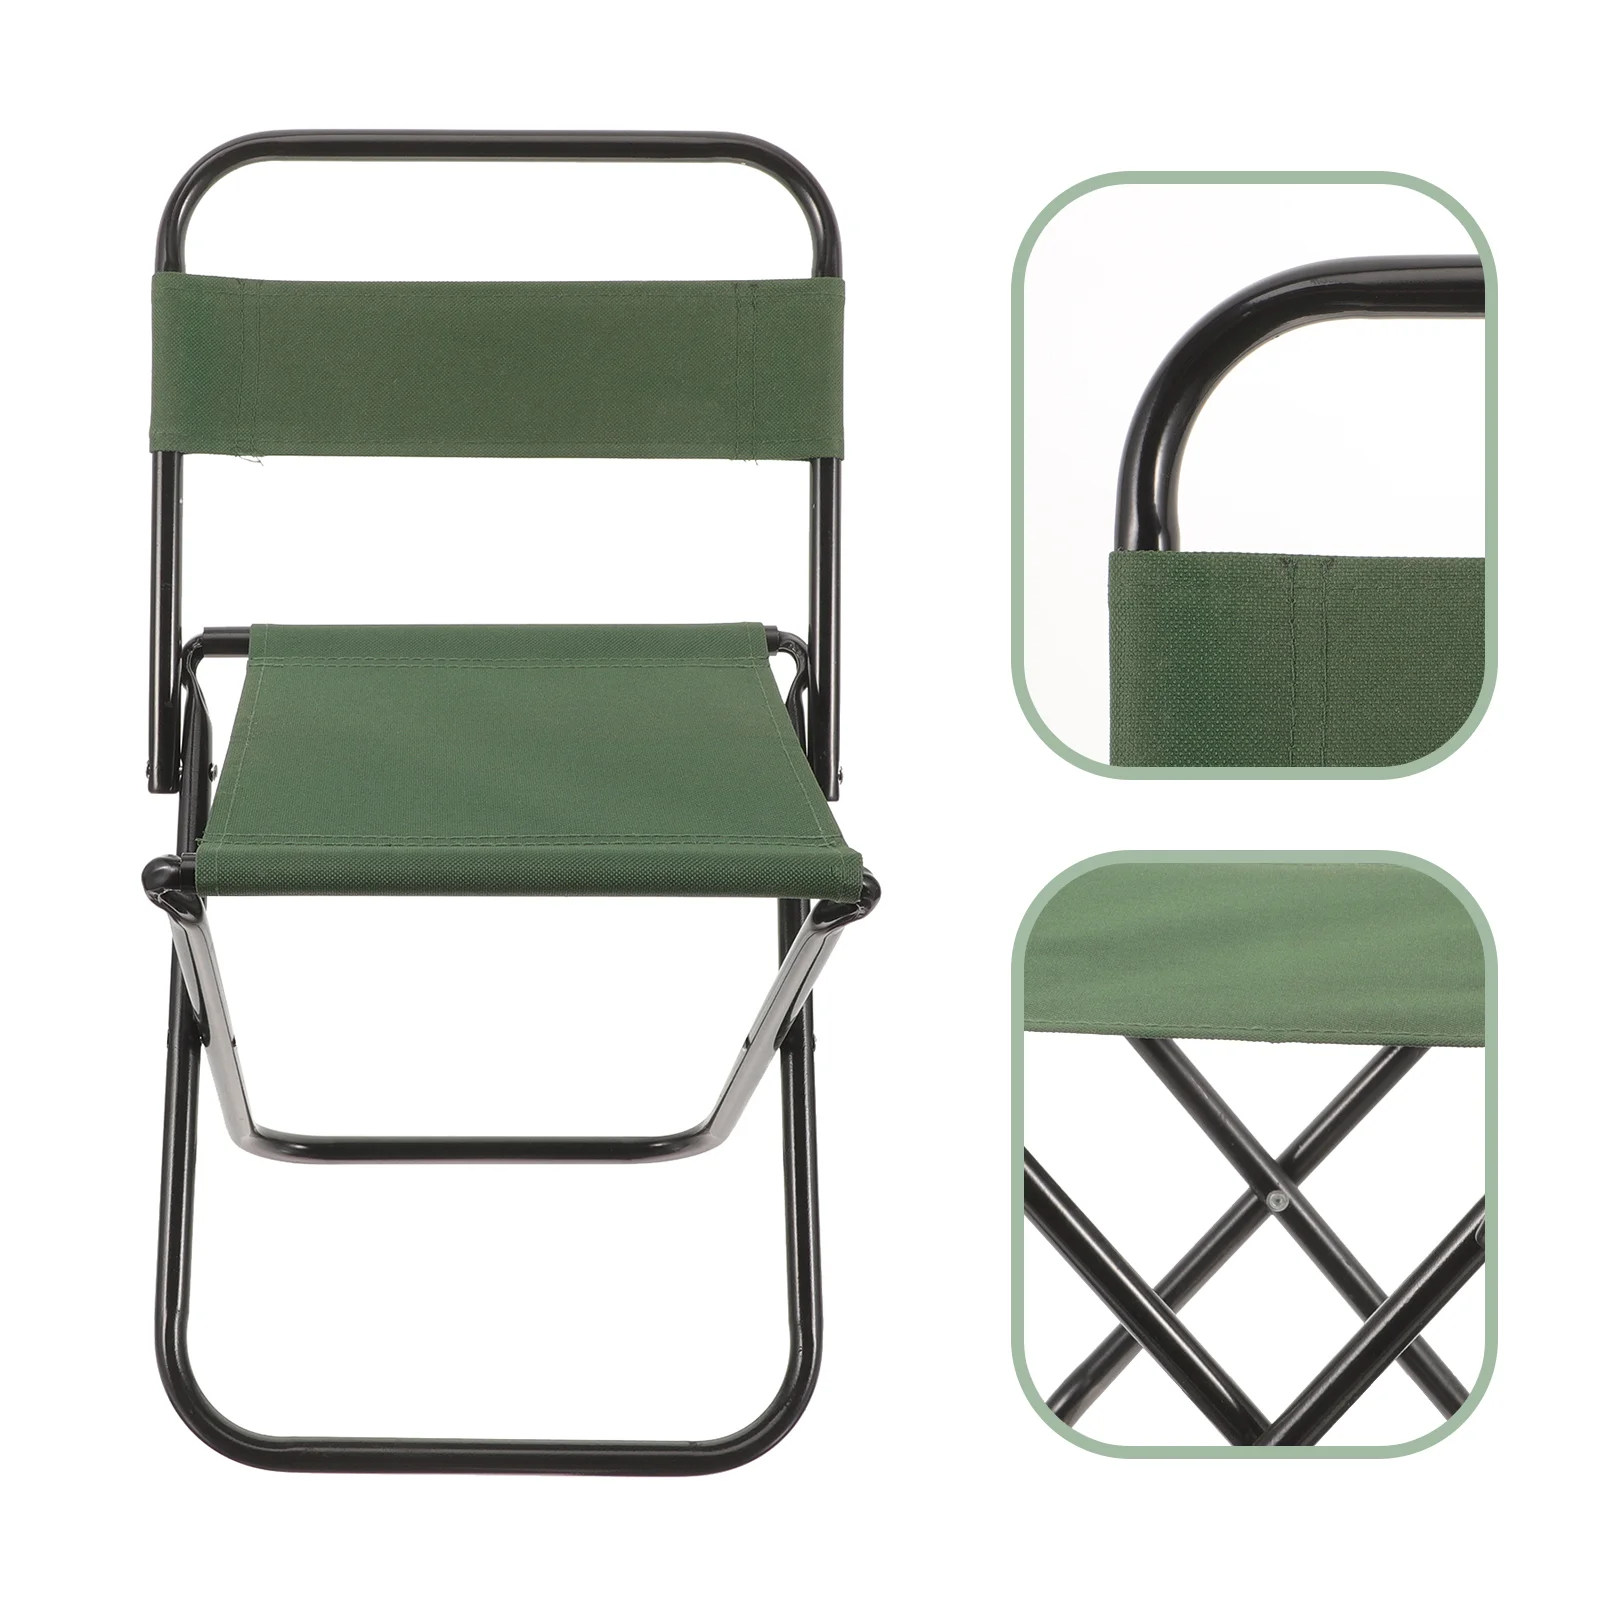 

Small Square Stool with Backrest Folding Chairs Beach Lightweight Portable for Adults Compact High Camping Heavy Duty outside